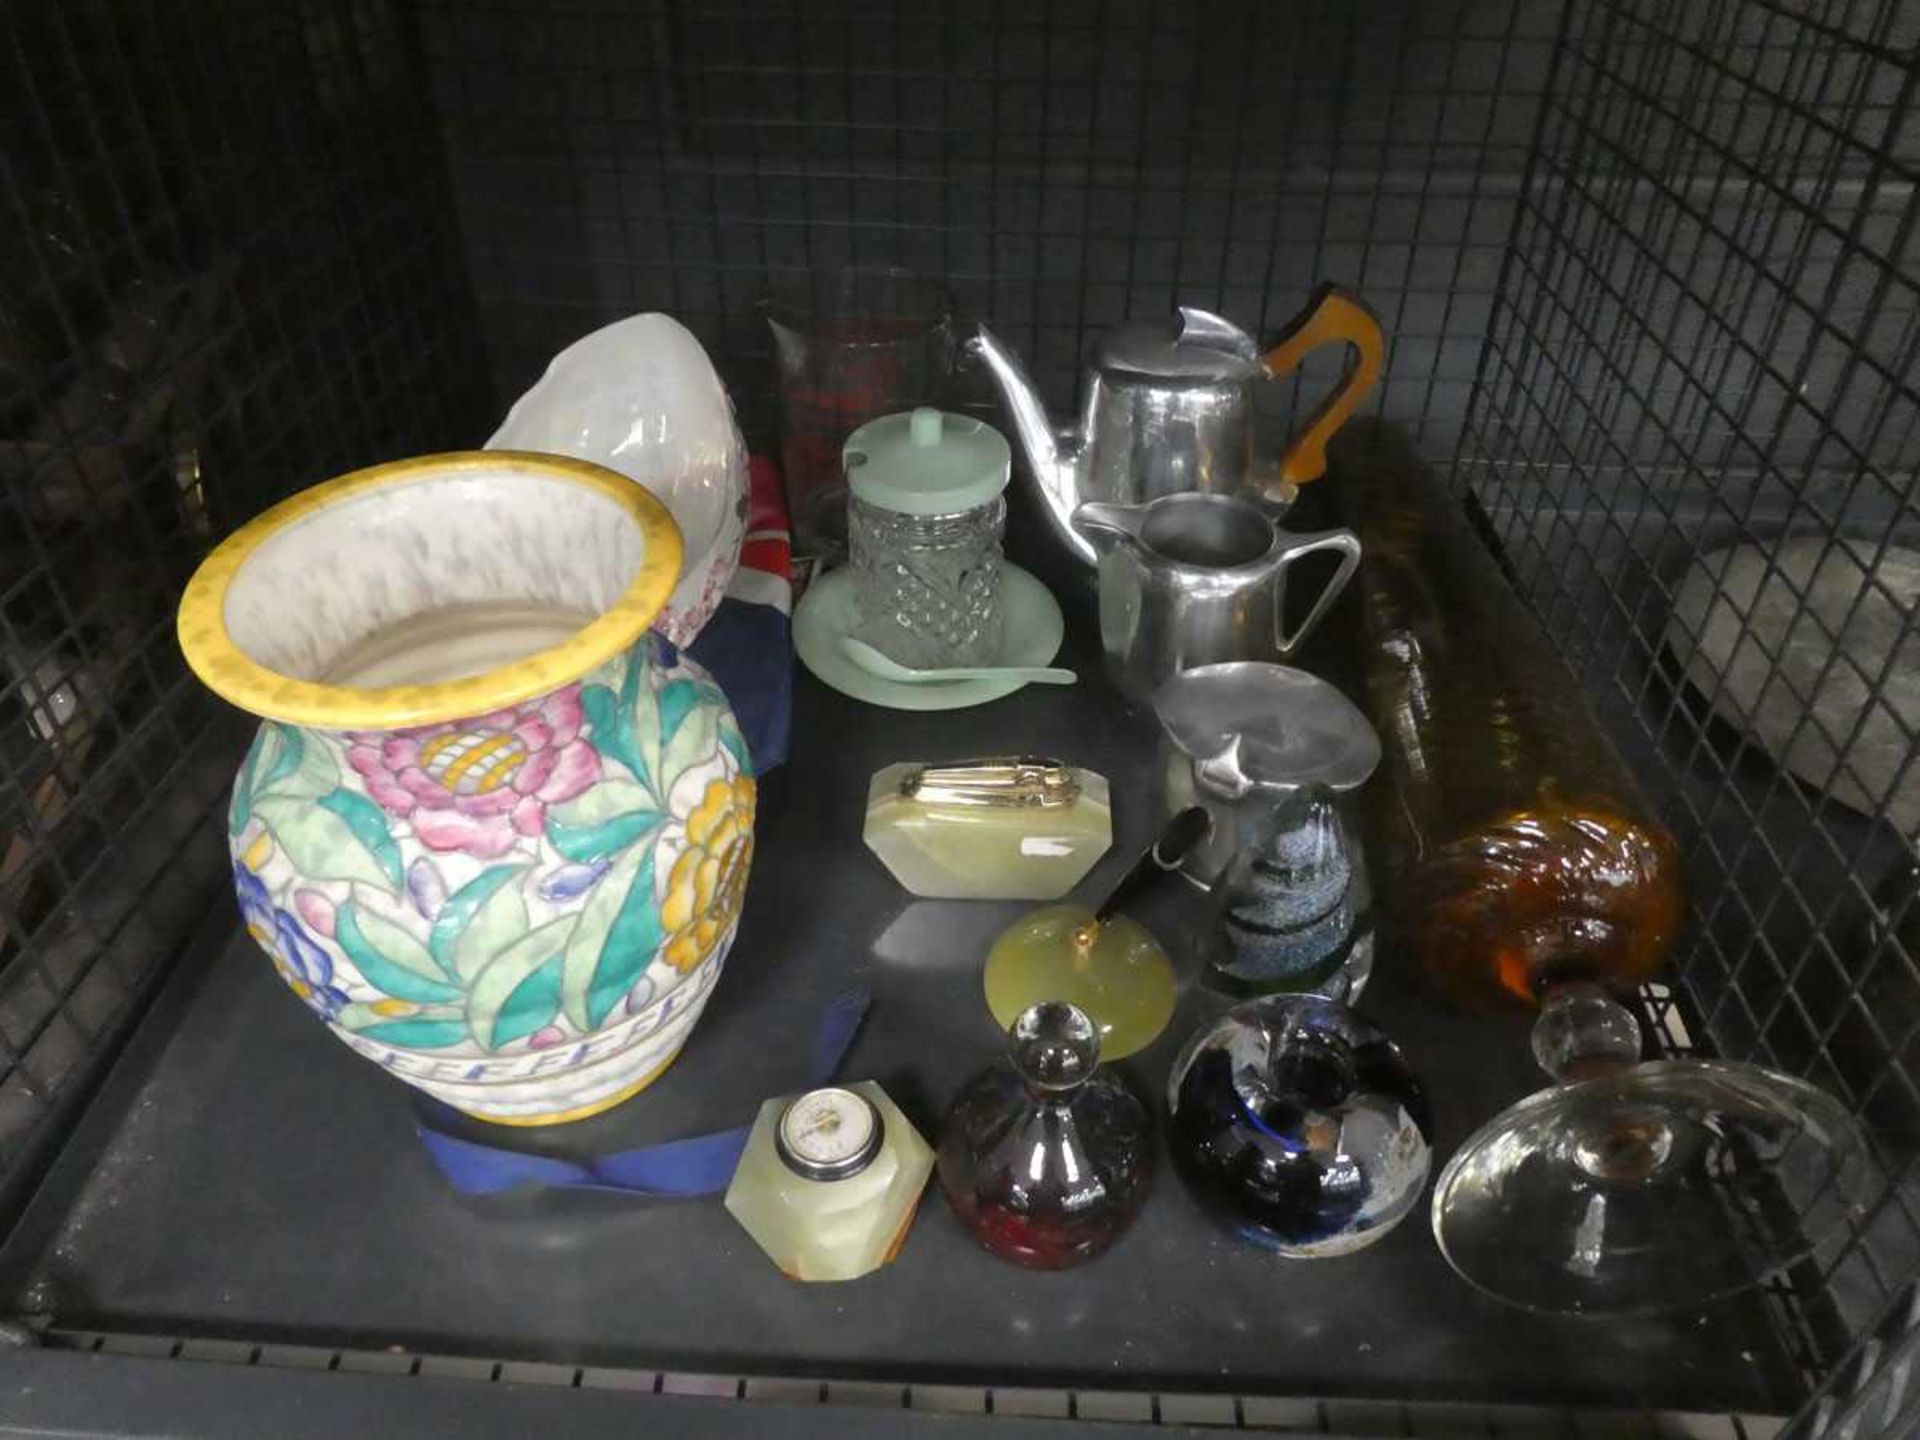 Cage containing paperweights, floral patterned vase plus Piquot ware 3 piece service